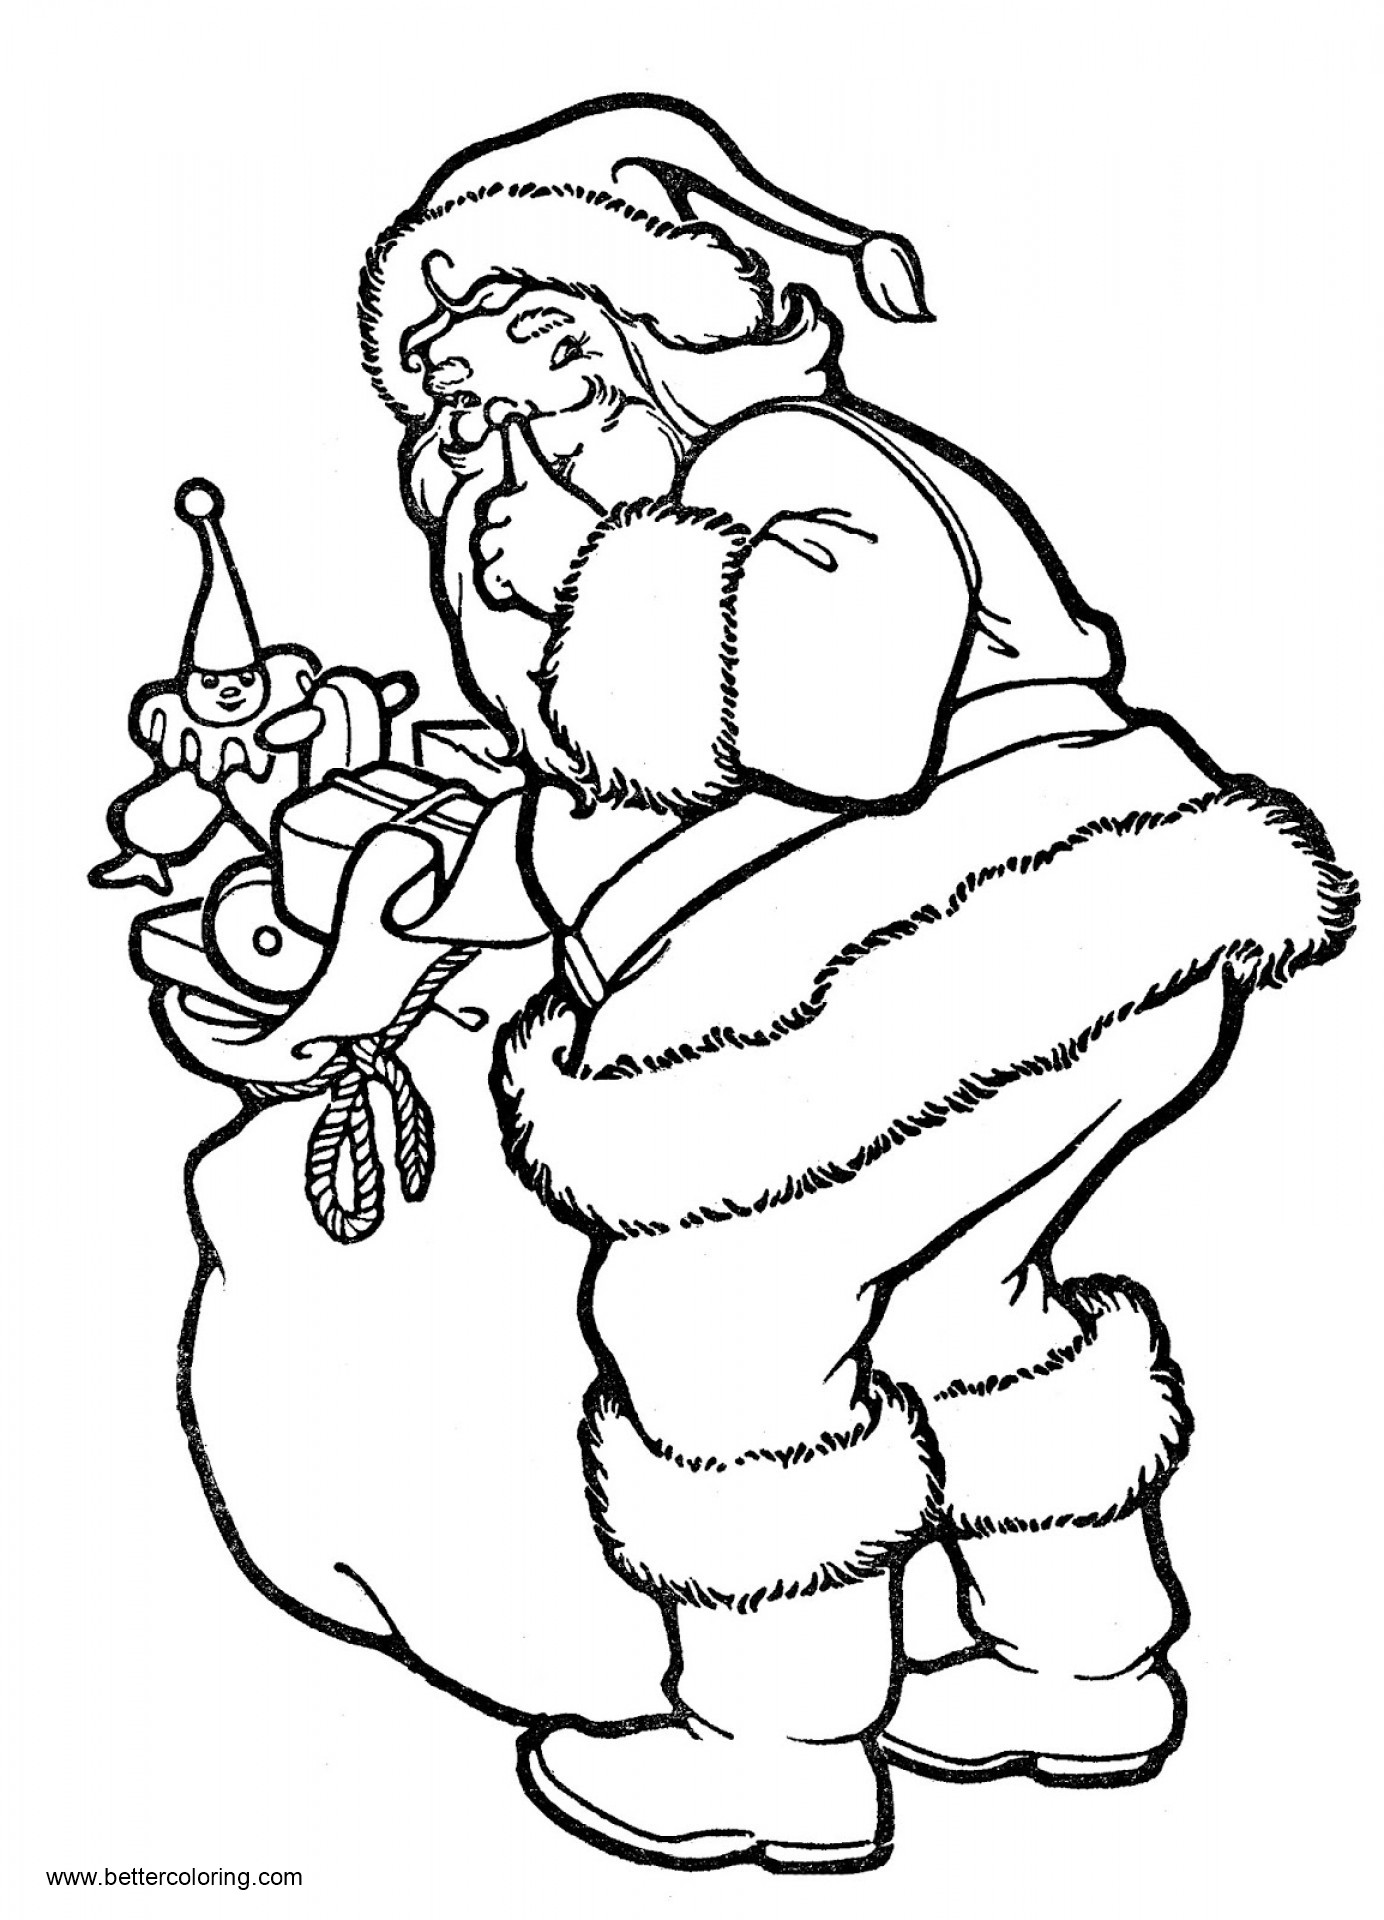 Christmas Coloring Pages Cute Santa With Toys Free Printable Coloring